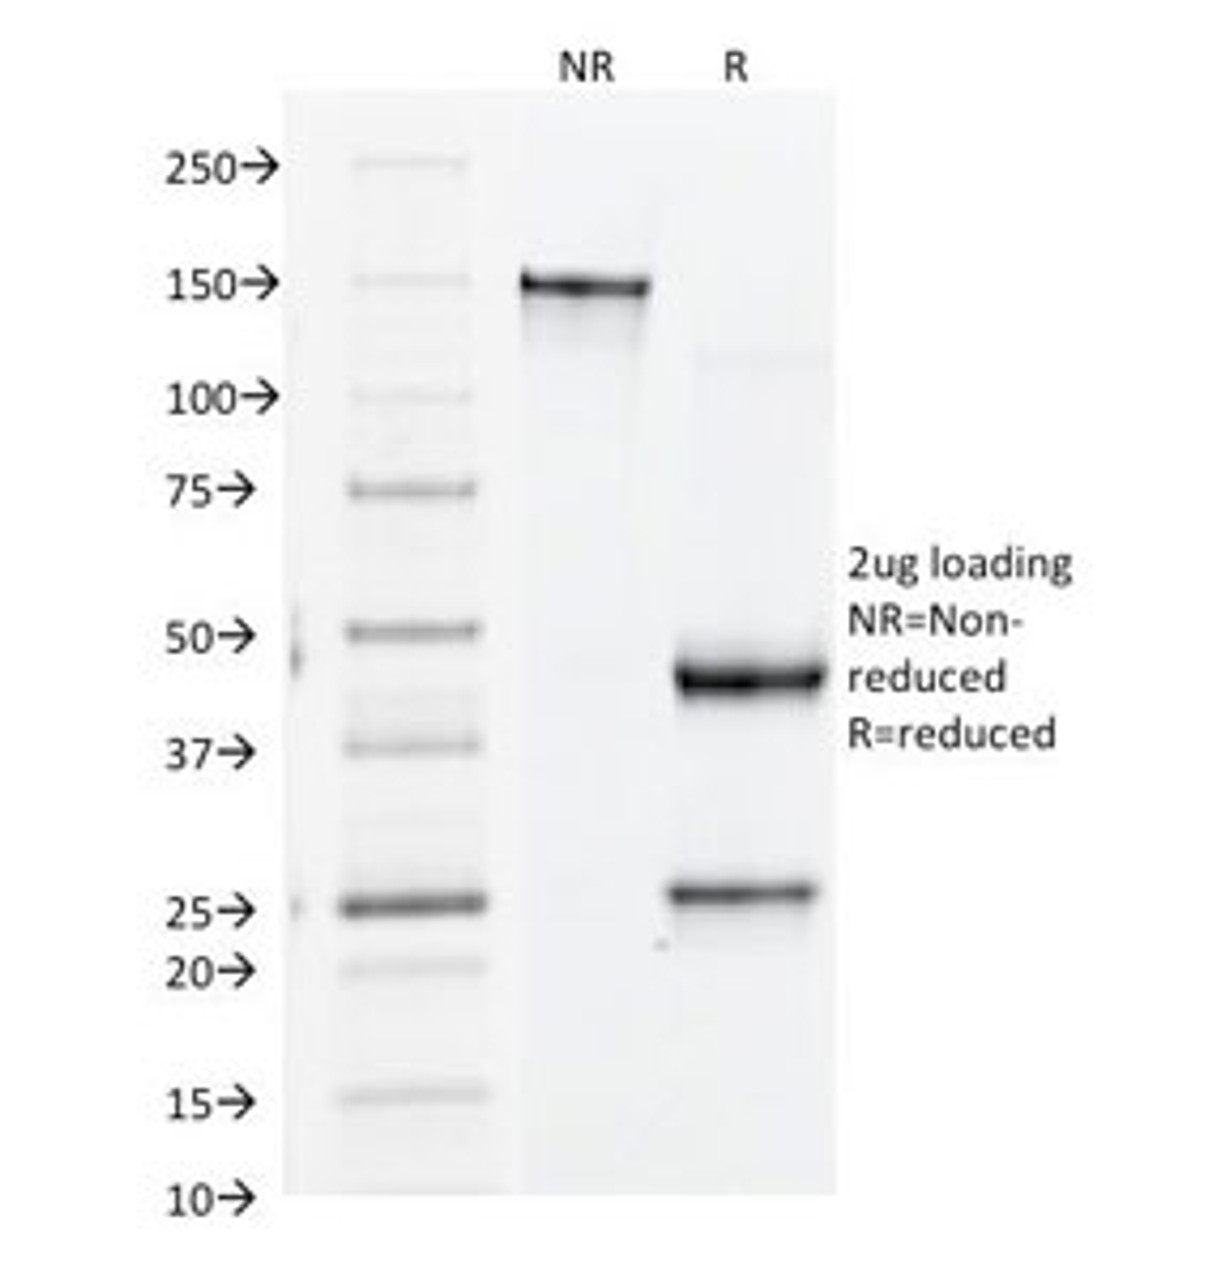 SDS-PAGE Analysis of Purified, BSA-Free CD61 Antibody (clone Y2/51) . Confirmation of Integrity and Purity of the Antibody.